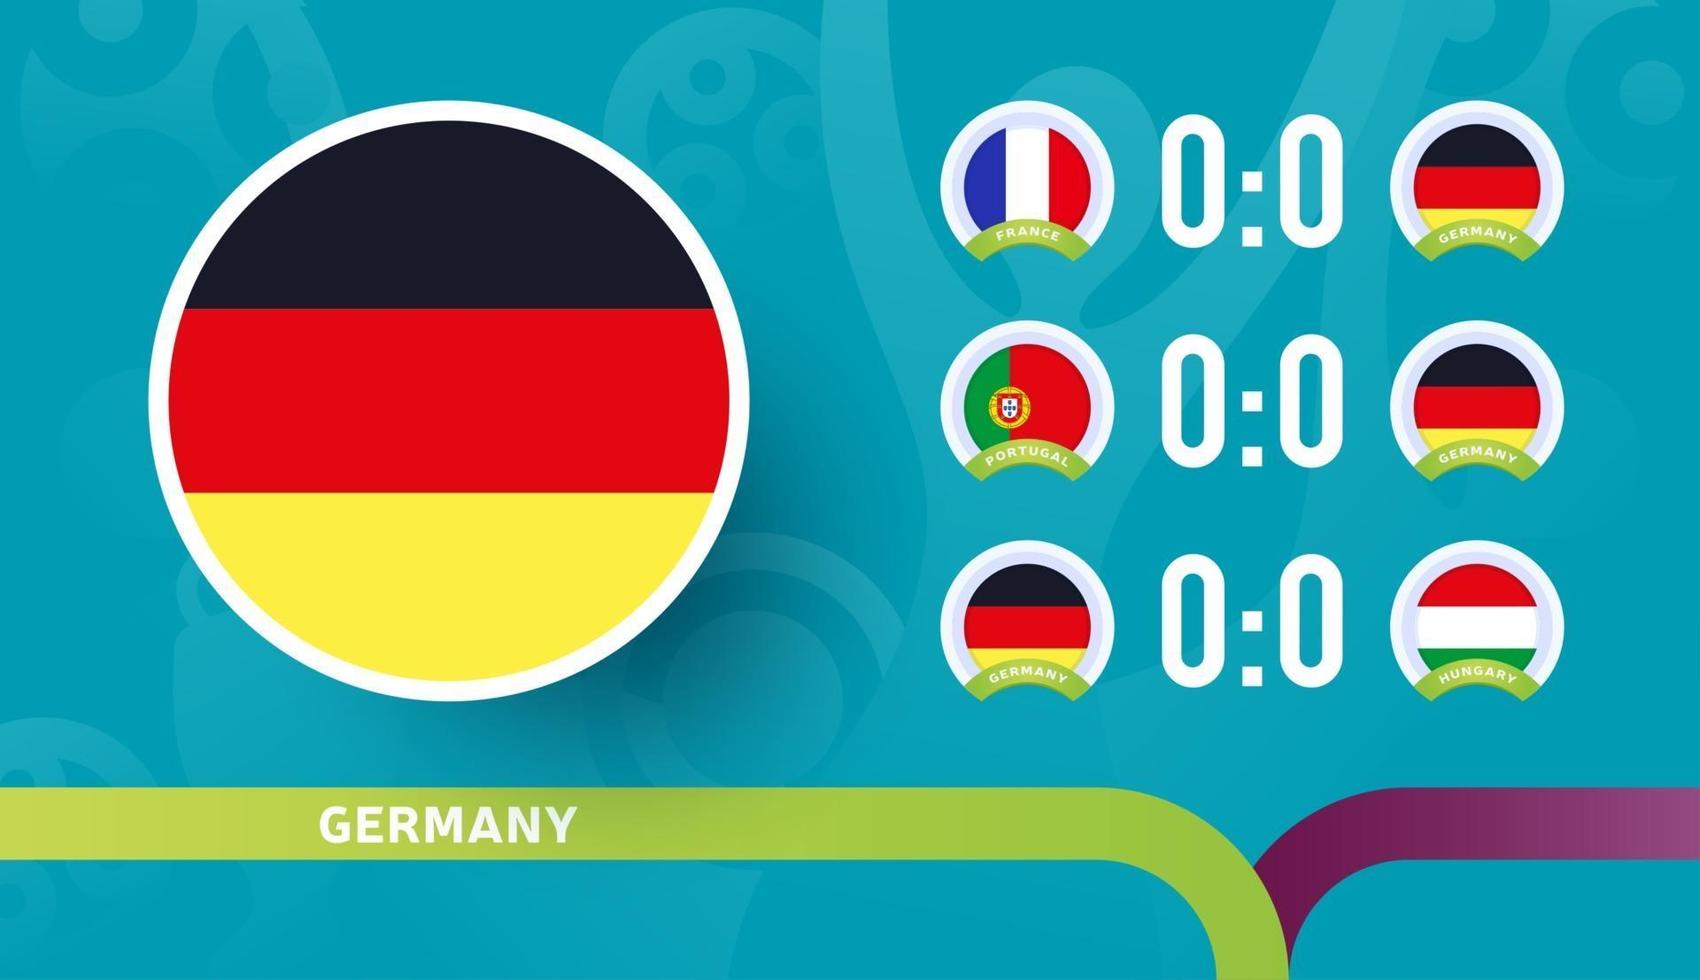 germany national team Schedule matches in the final stage at the 2020 Football Championship. Vector illustration of football 2020 matches